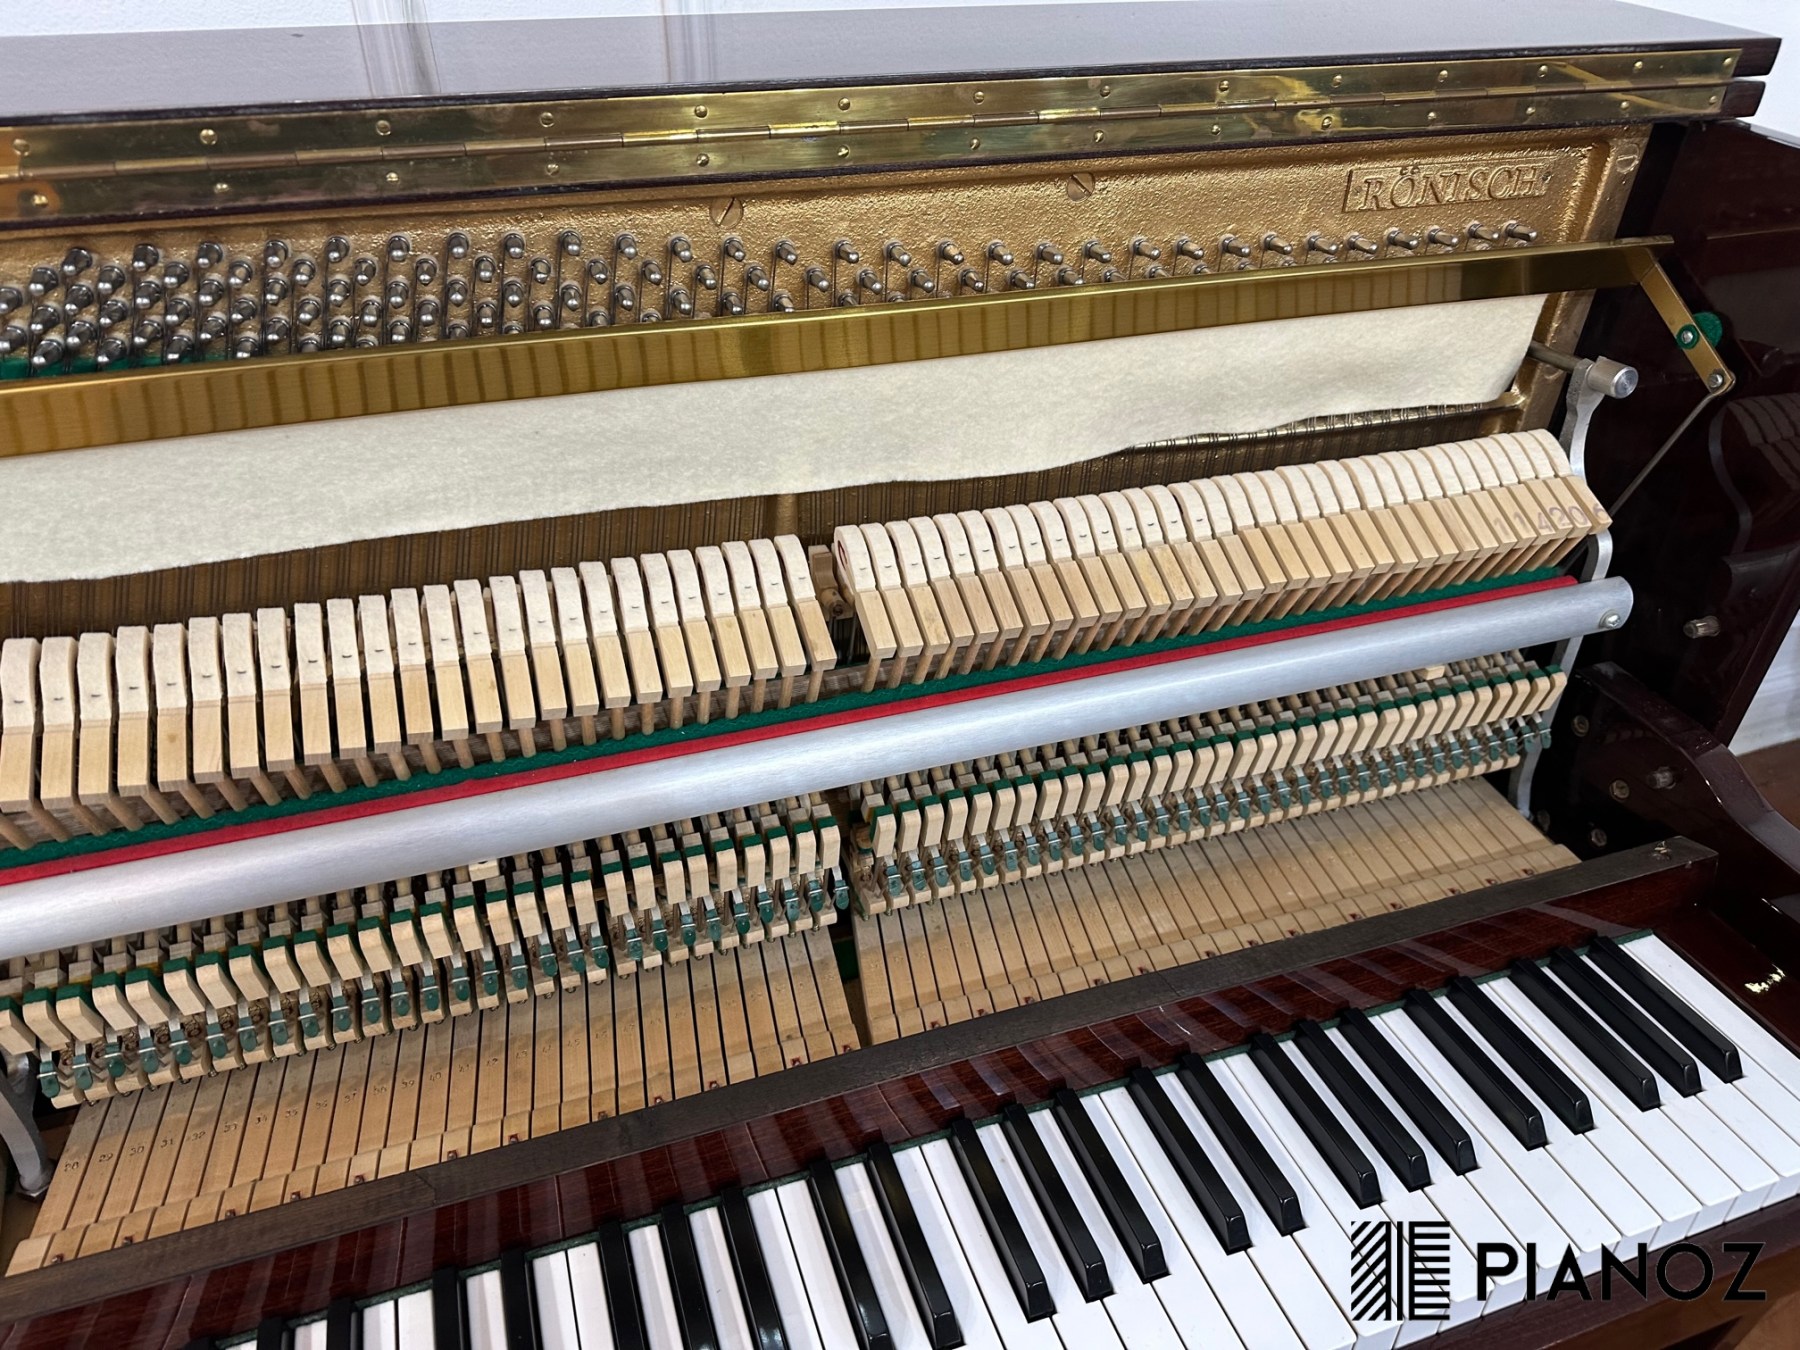 Ronisch 109 Upright Piano piano for sale in UK